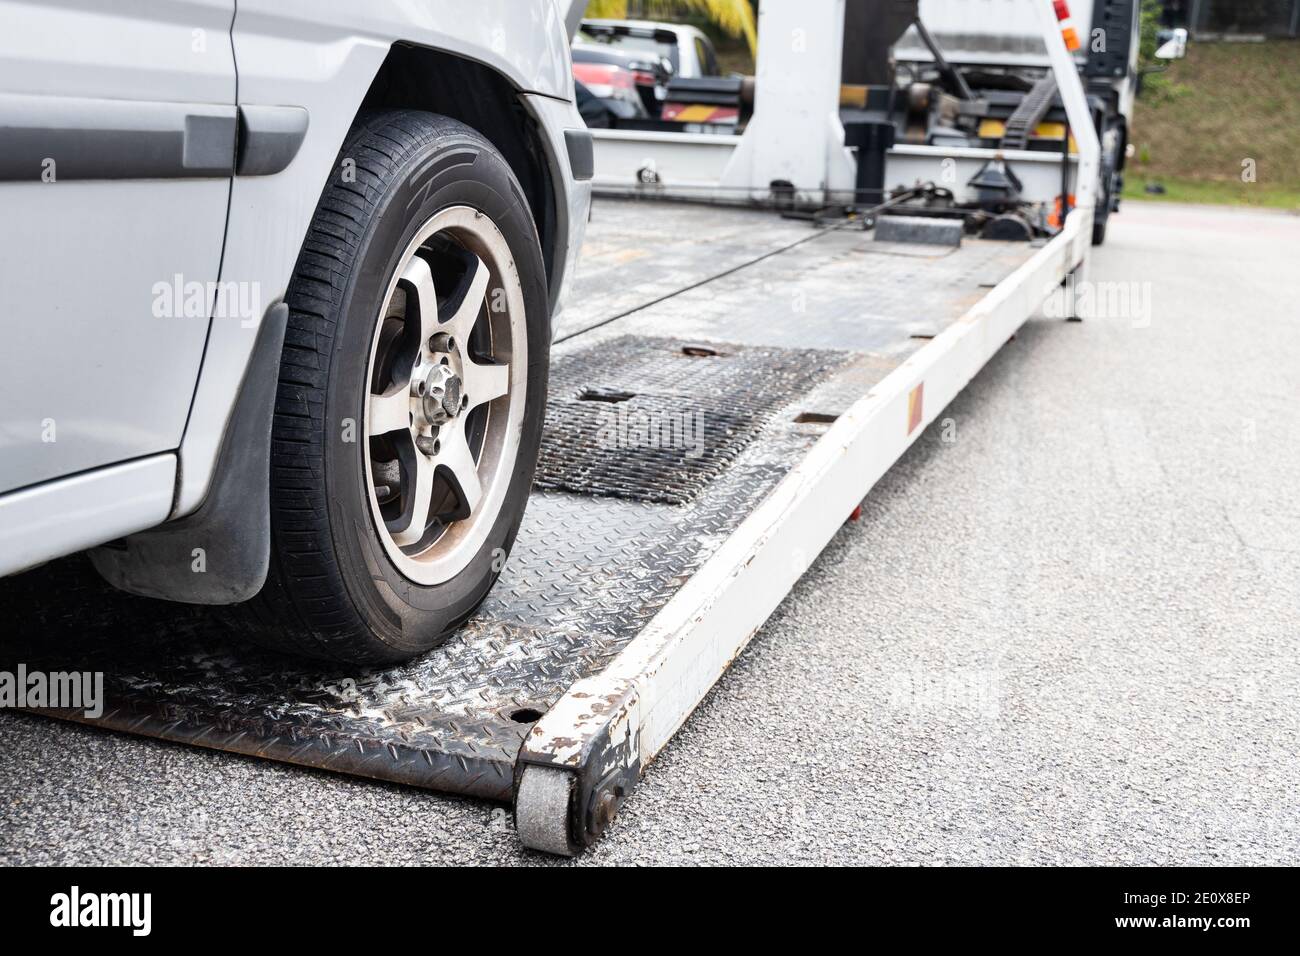 Cable attached to broken down car being pulled onto tow truck Stock Photo